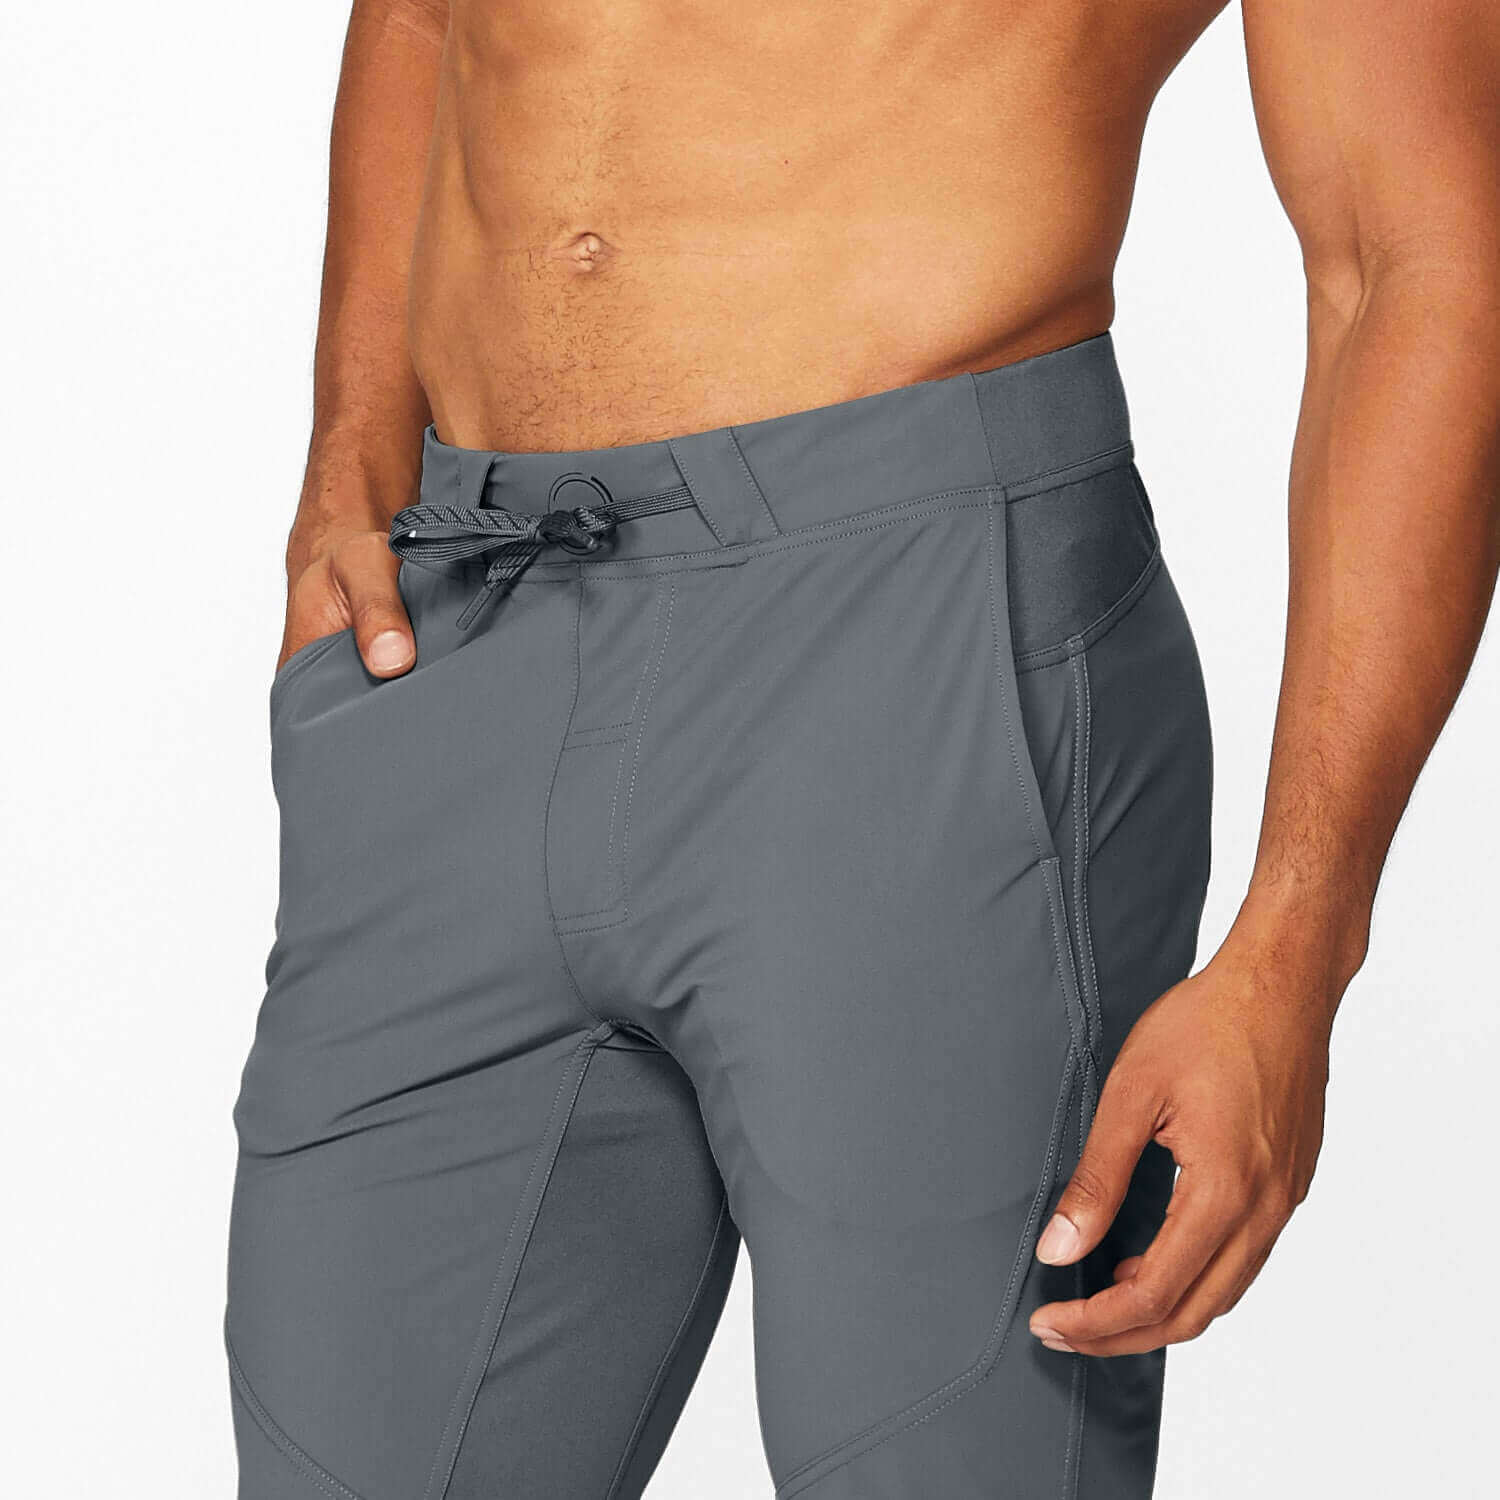 Men's Bottoms ▻Athletic and cool